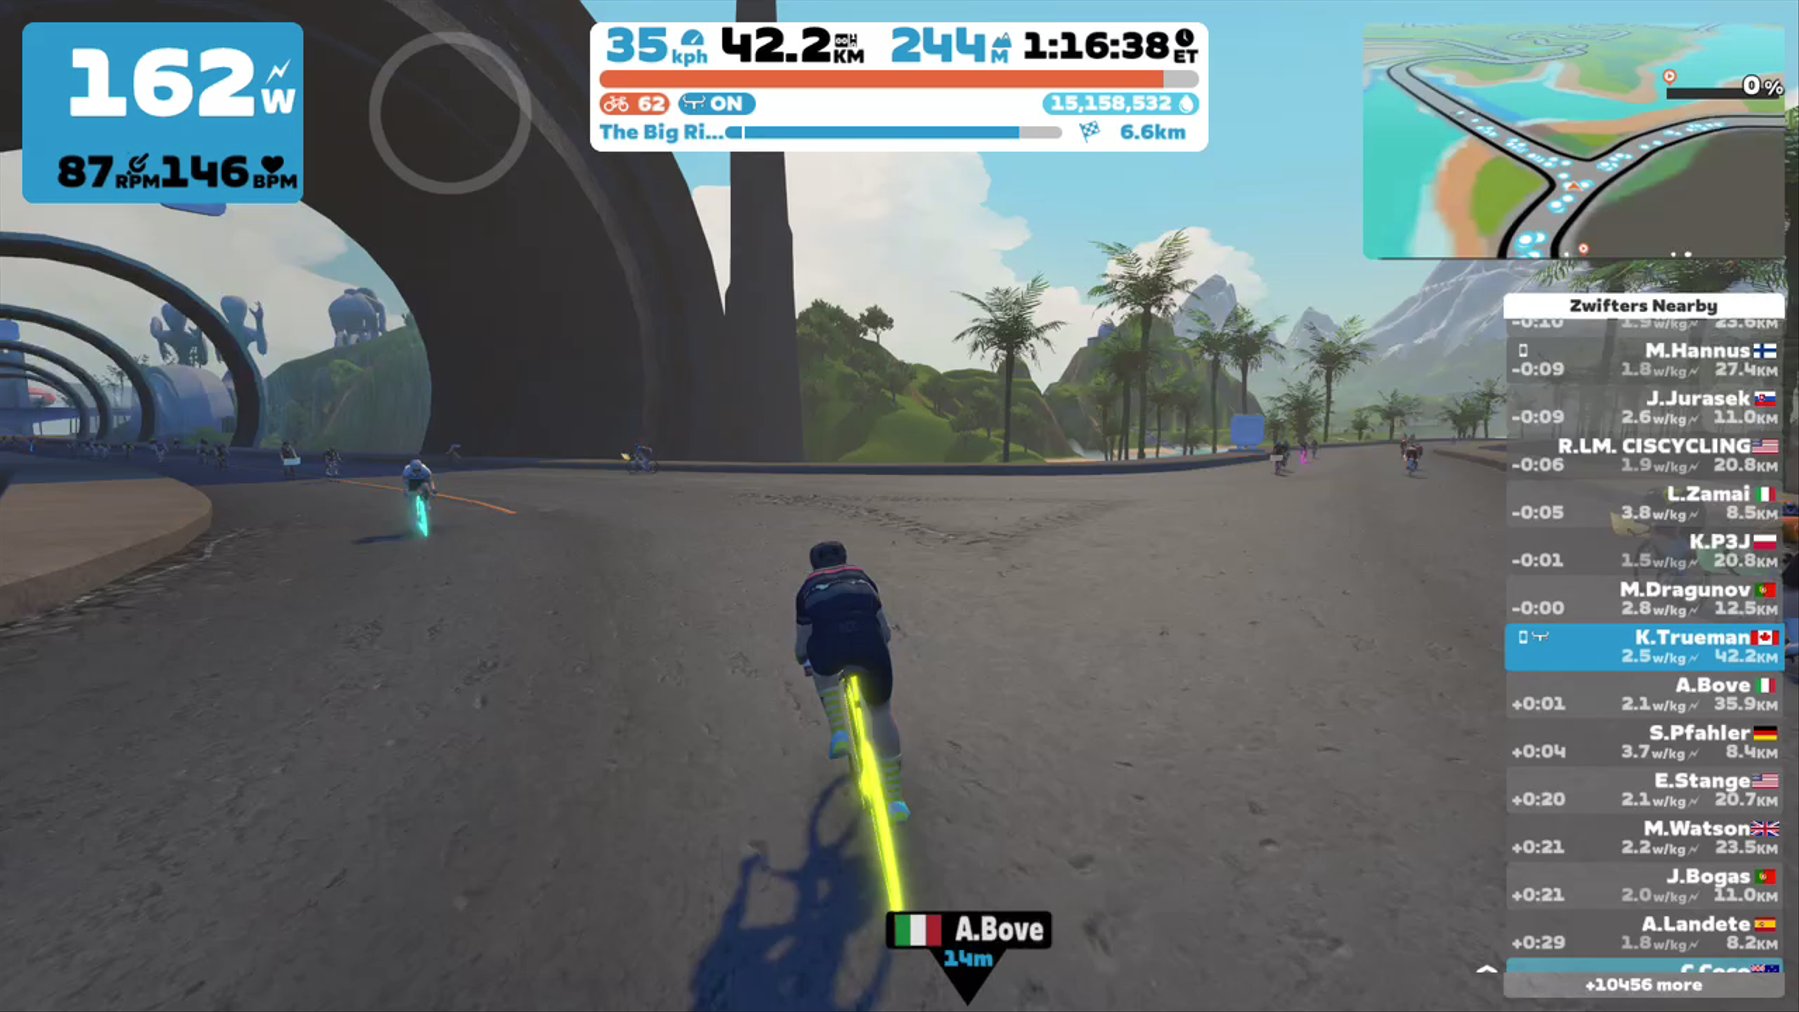 Zwift - The Big Ring in Watopia - level 63 !